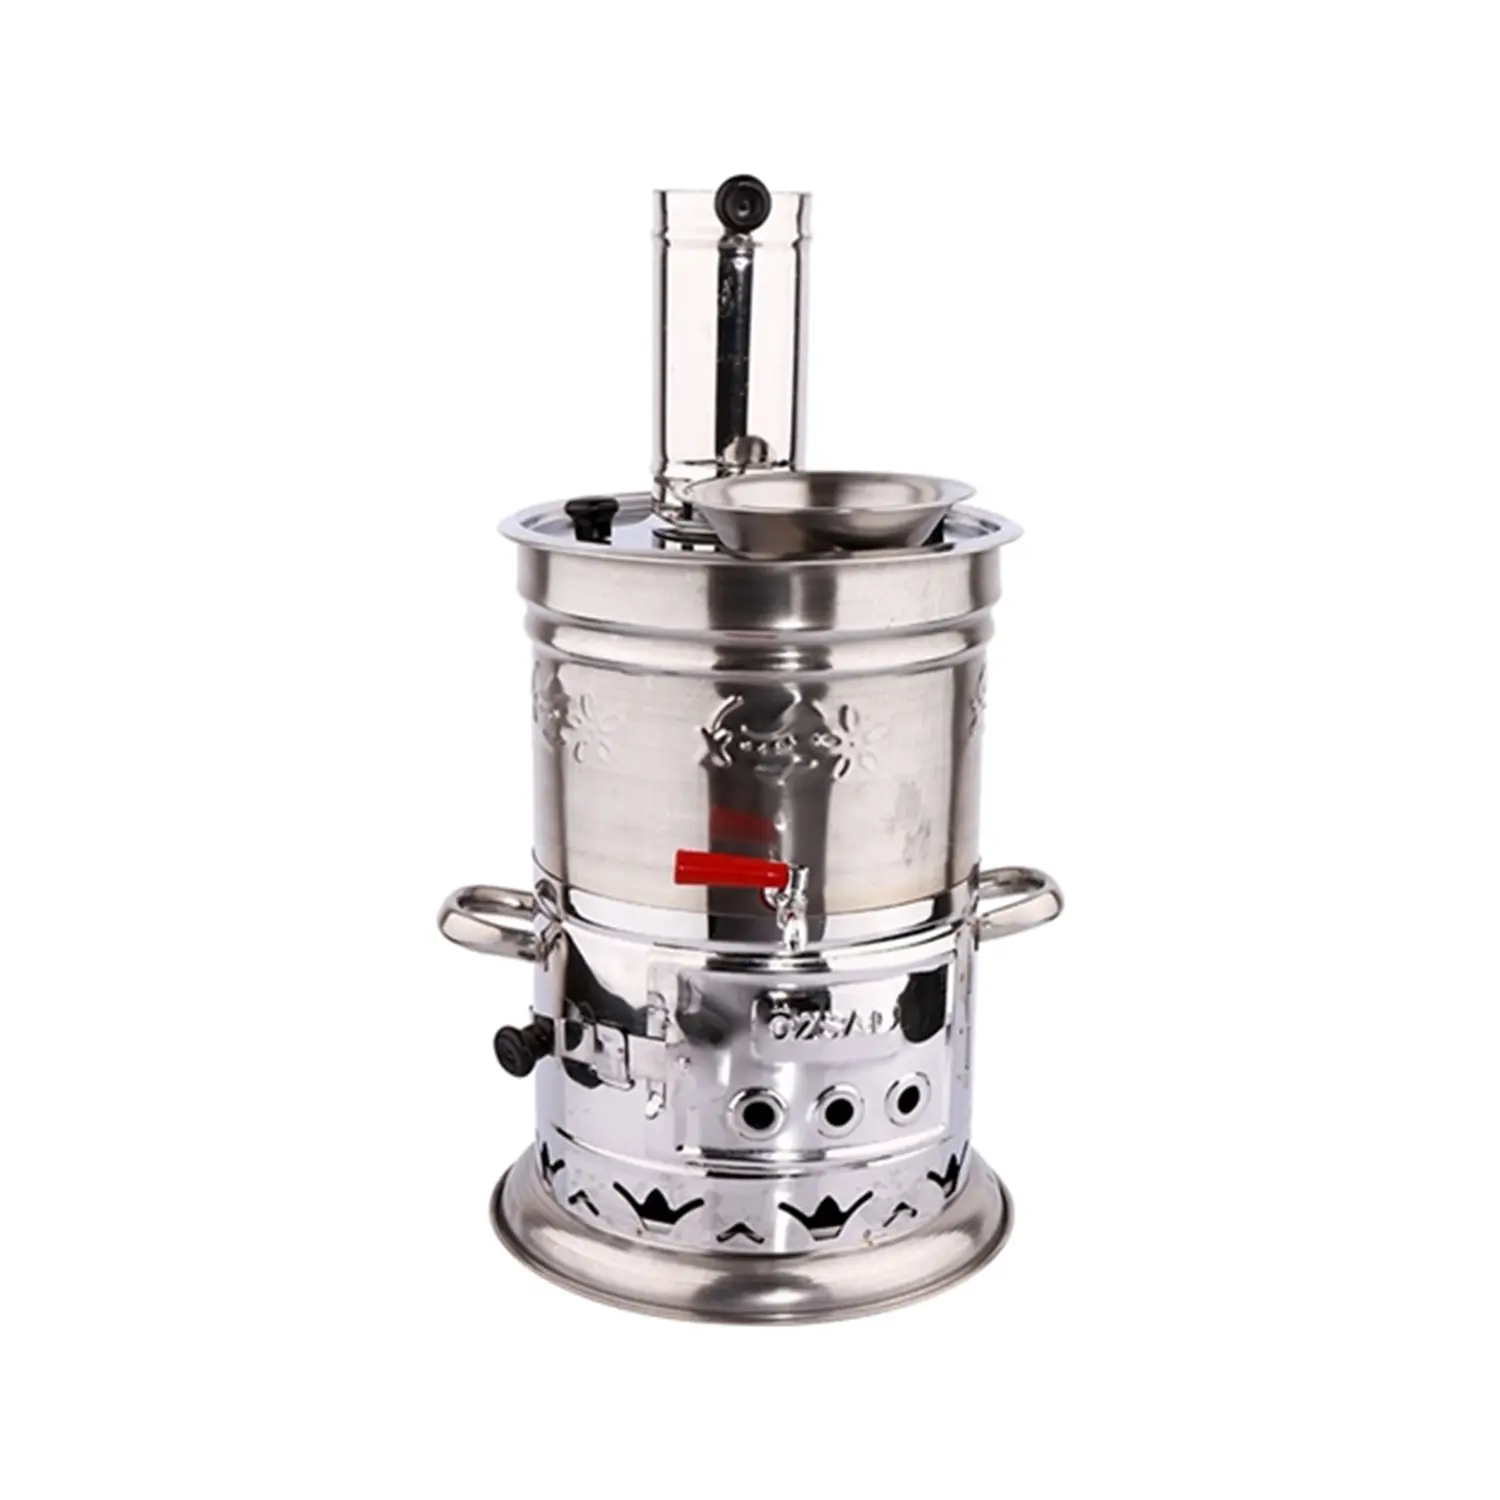 Stainless Steel Chrome Samovar Wood Burning Charcoal Camping Stove Tea Kettle Outdoor Tableware Camping Accessories Coffee